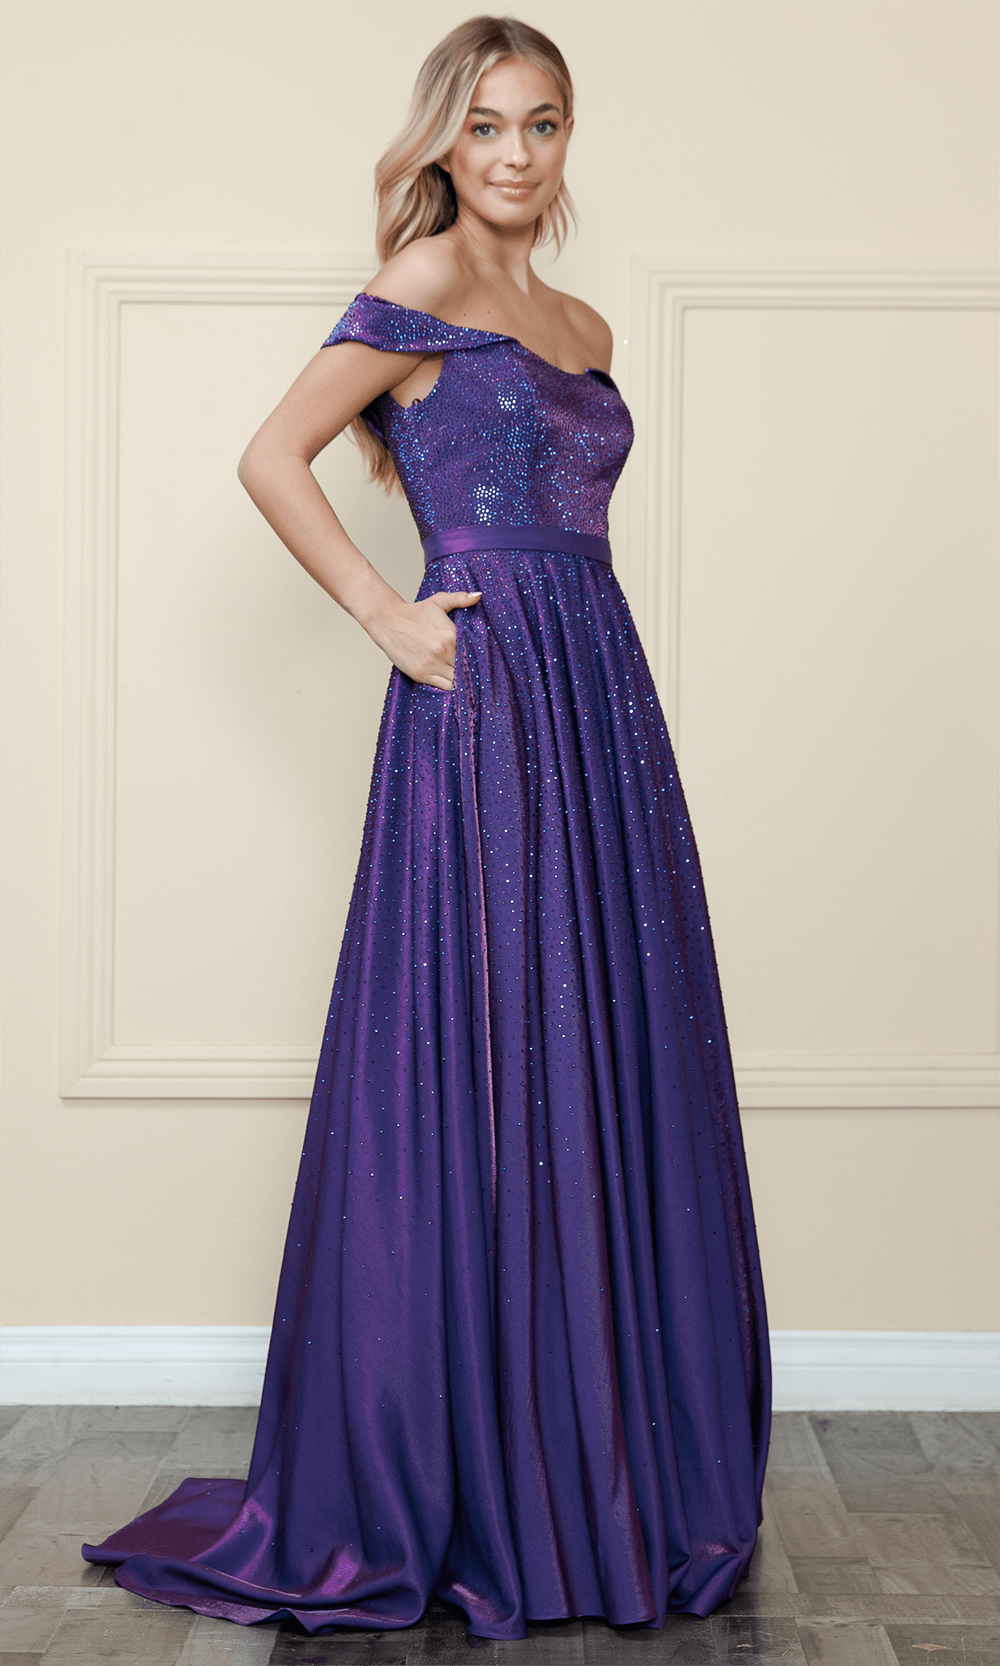 Poly USA 8890 - Cap Sleeve A-Line Gown